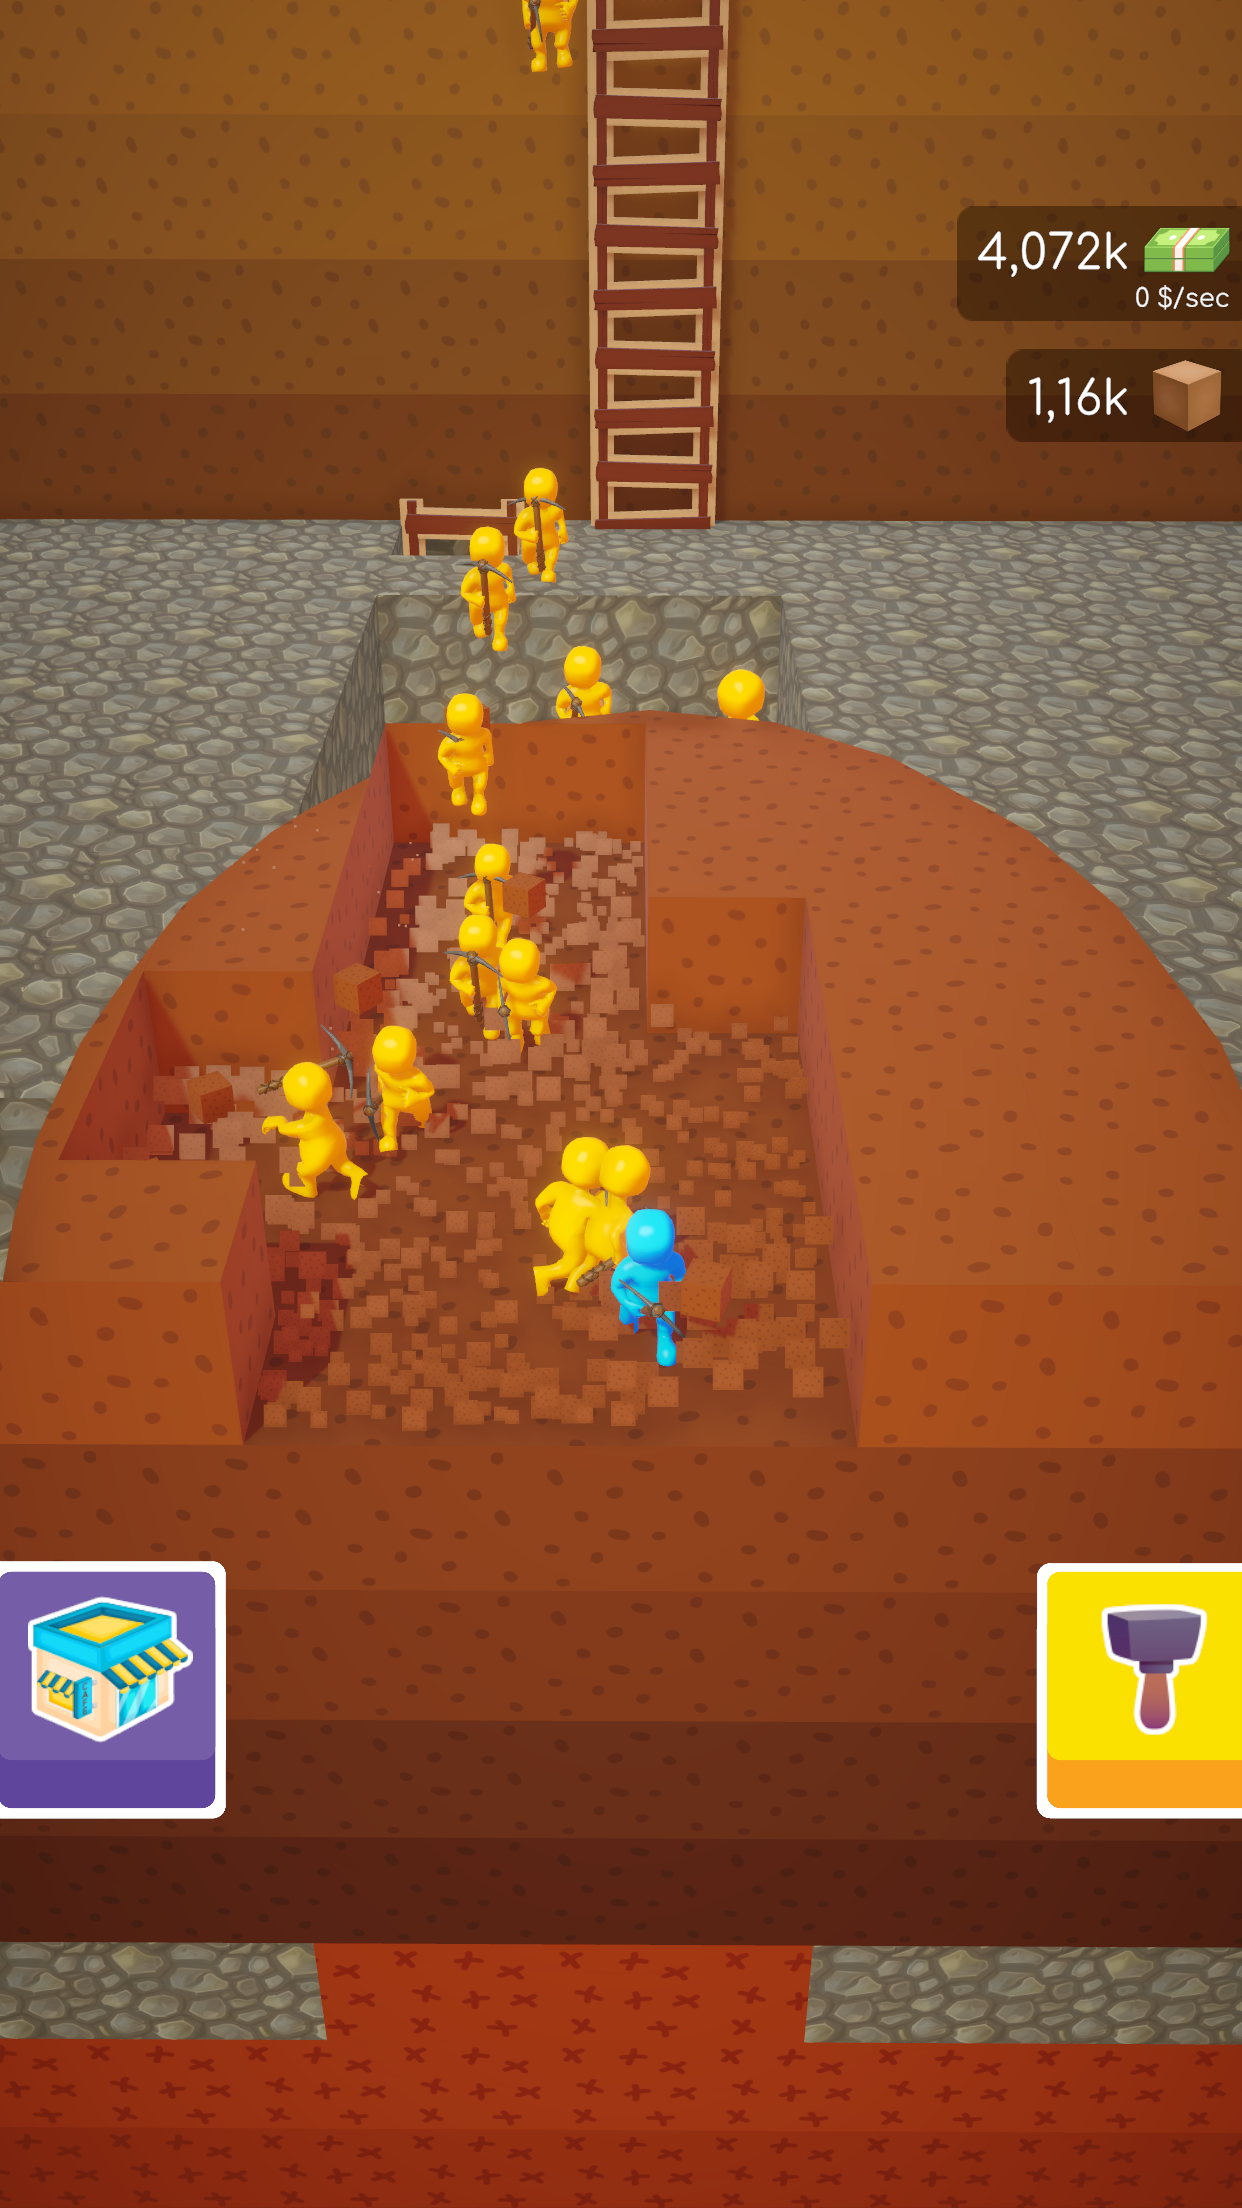 Free Mining Games APK for Android Download